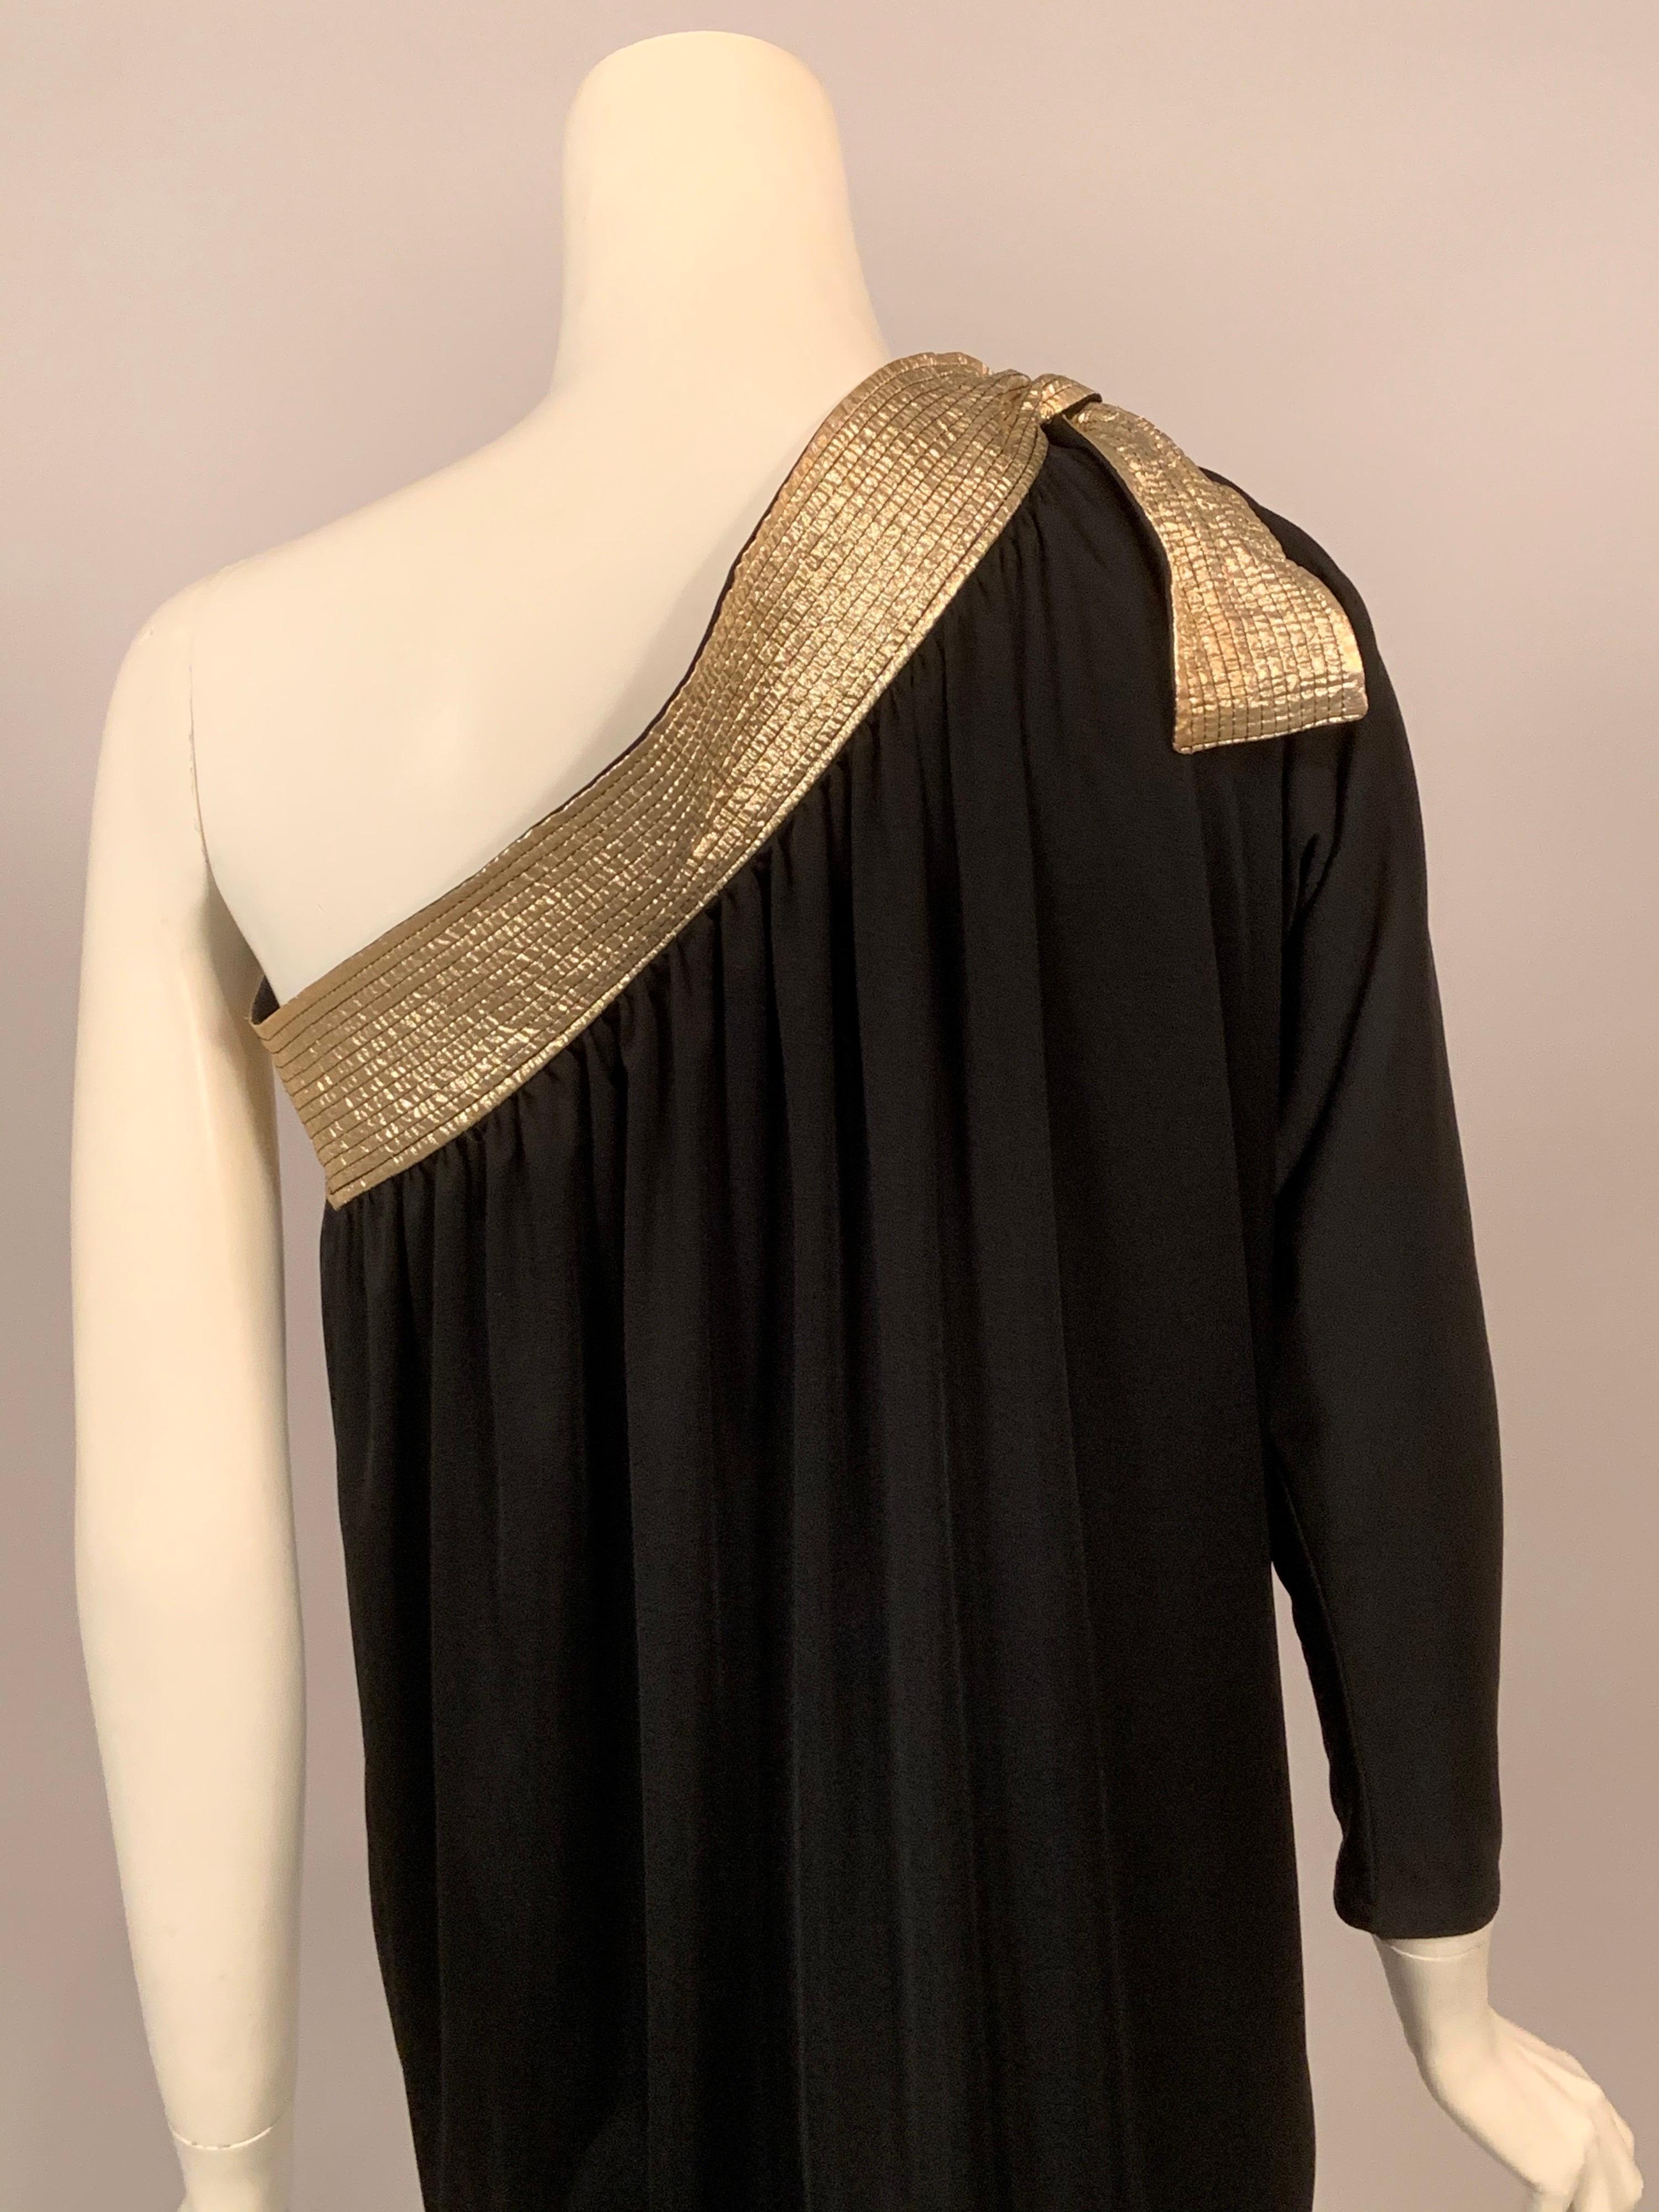 Bill Tice Gold Trimmed One Shoulder Black Evening or At Home Dress In Excellent Condition For Sale In New Hope, PA